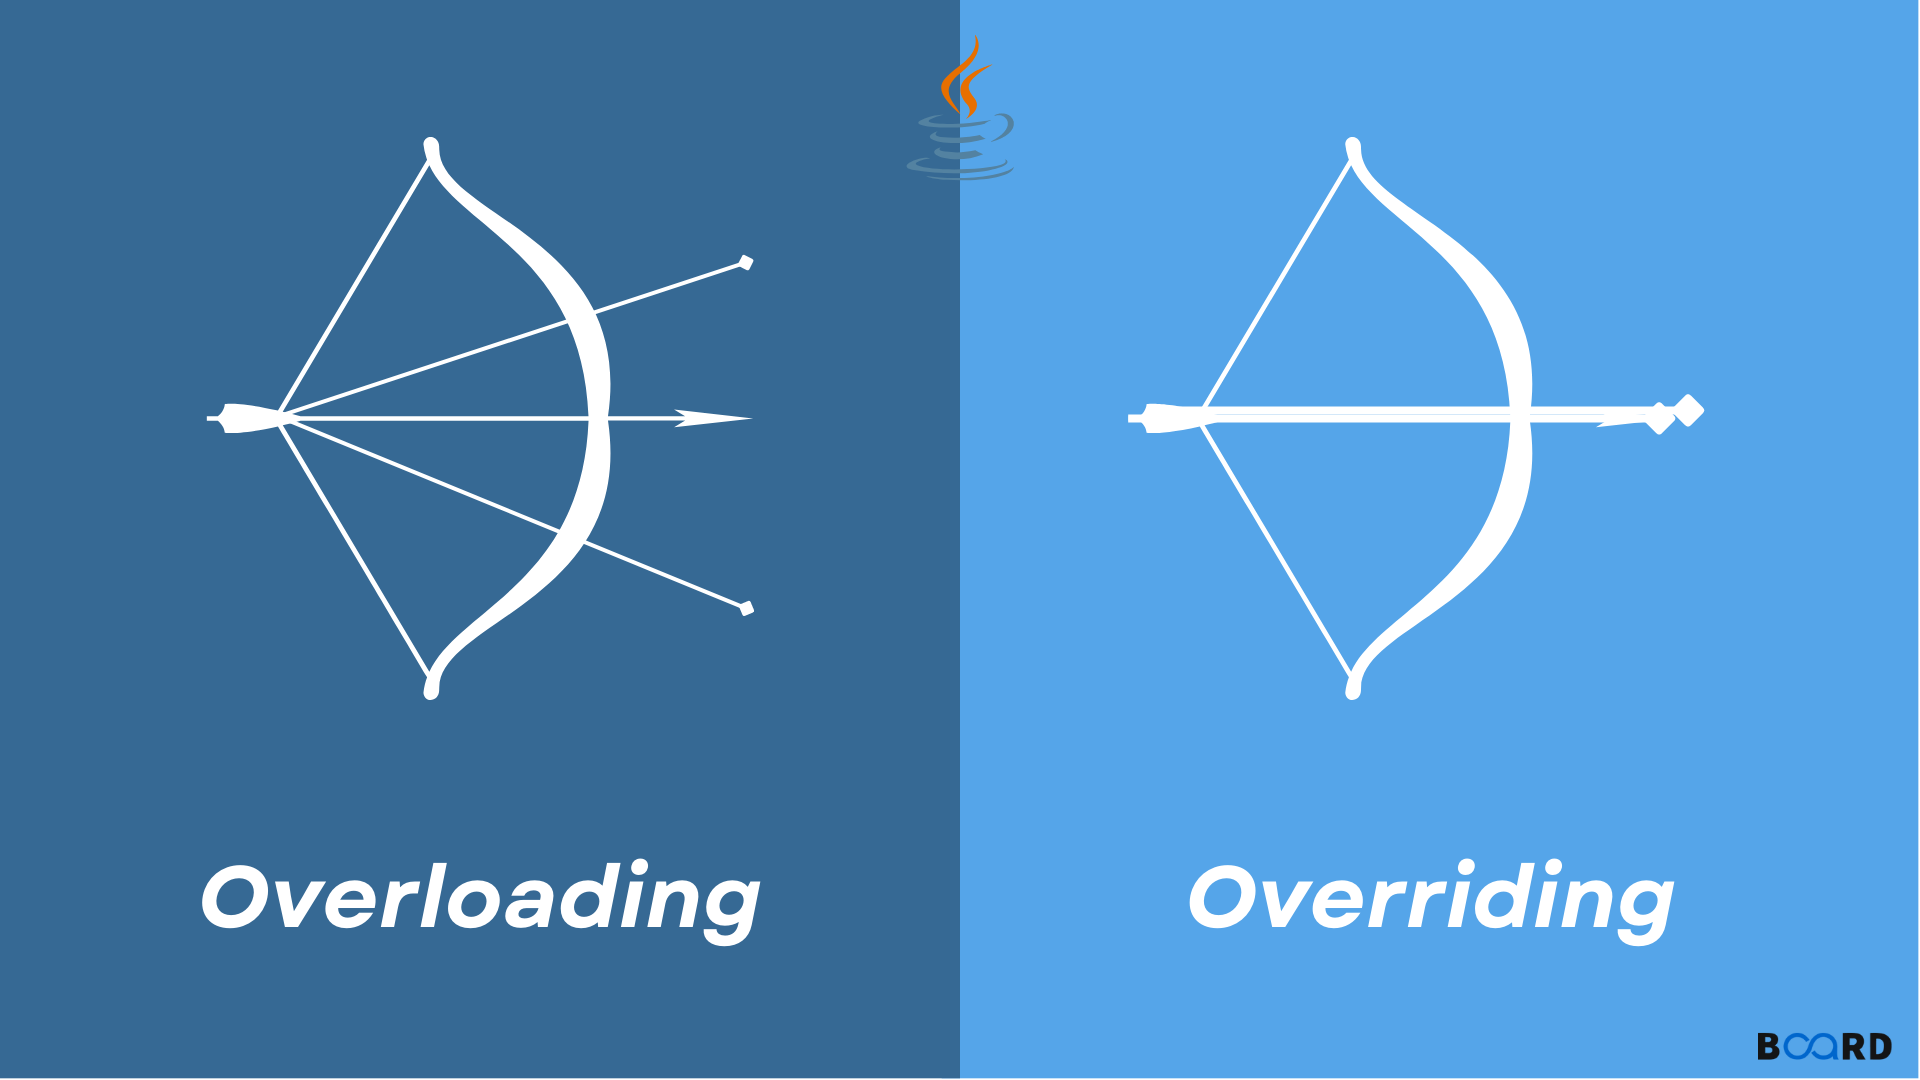 Method Overloading And Overriding In Java